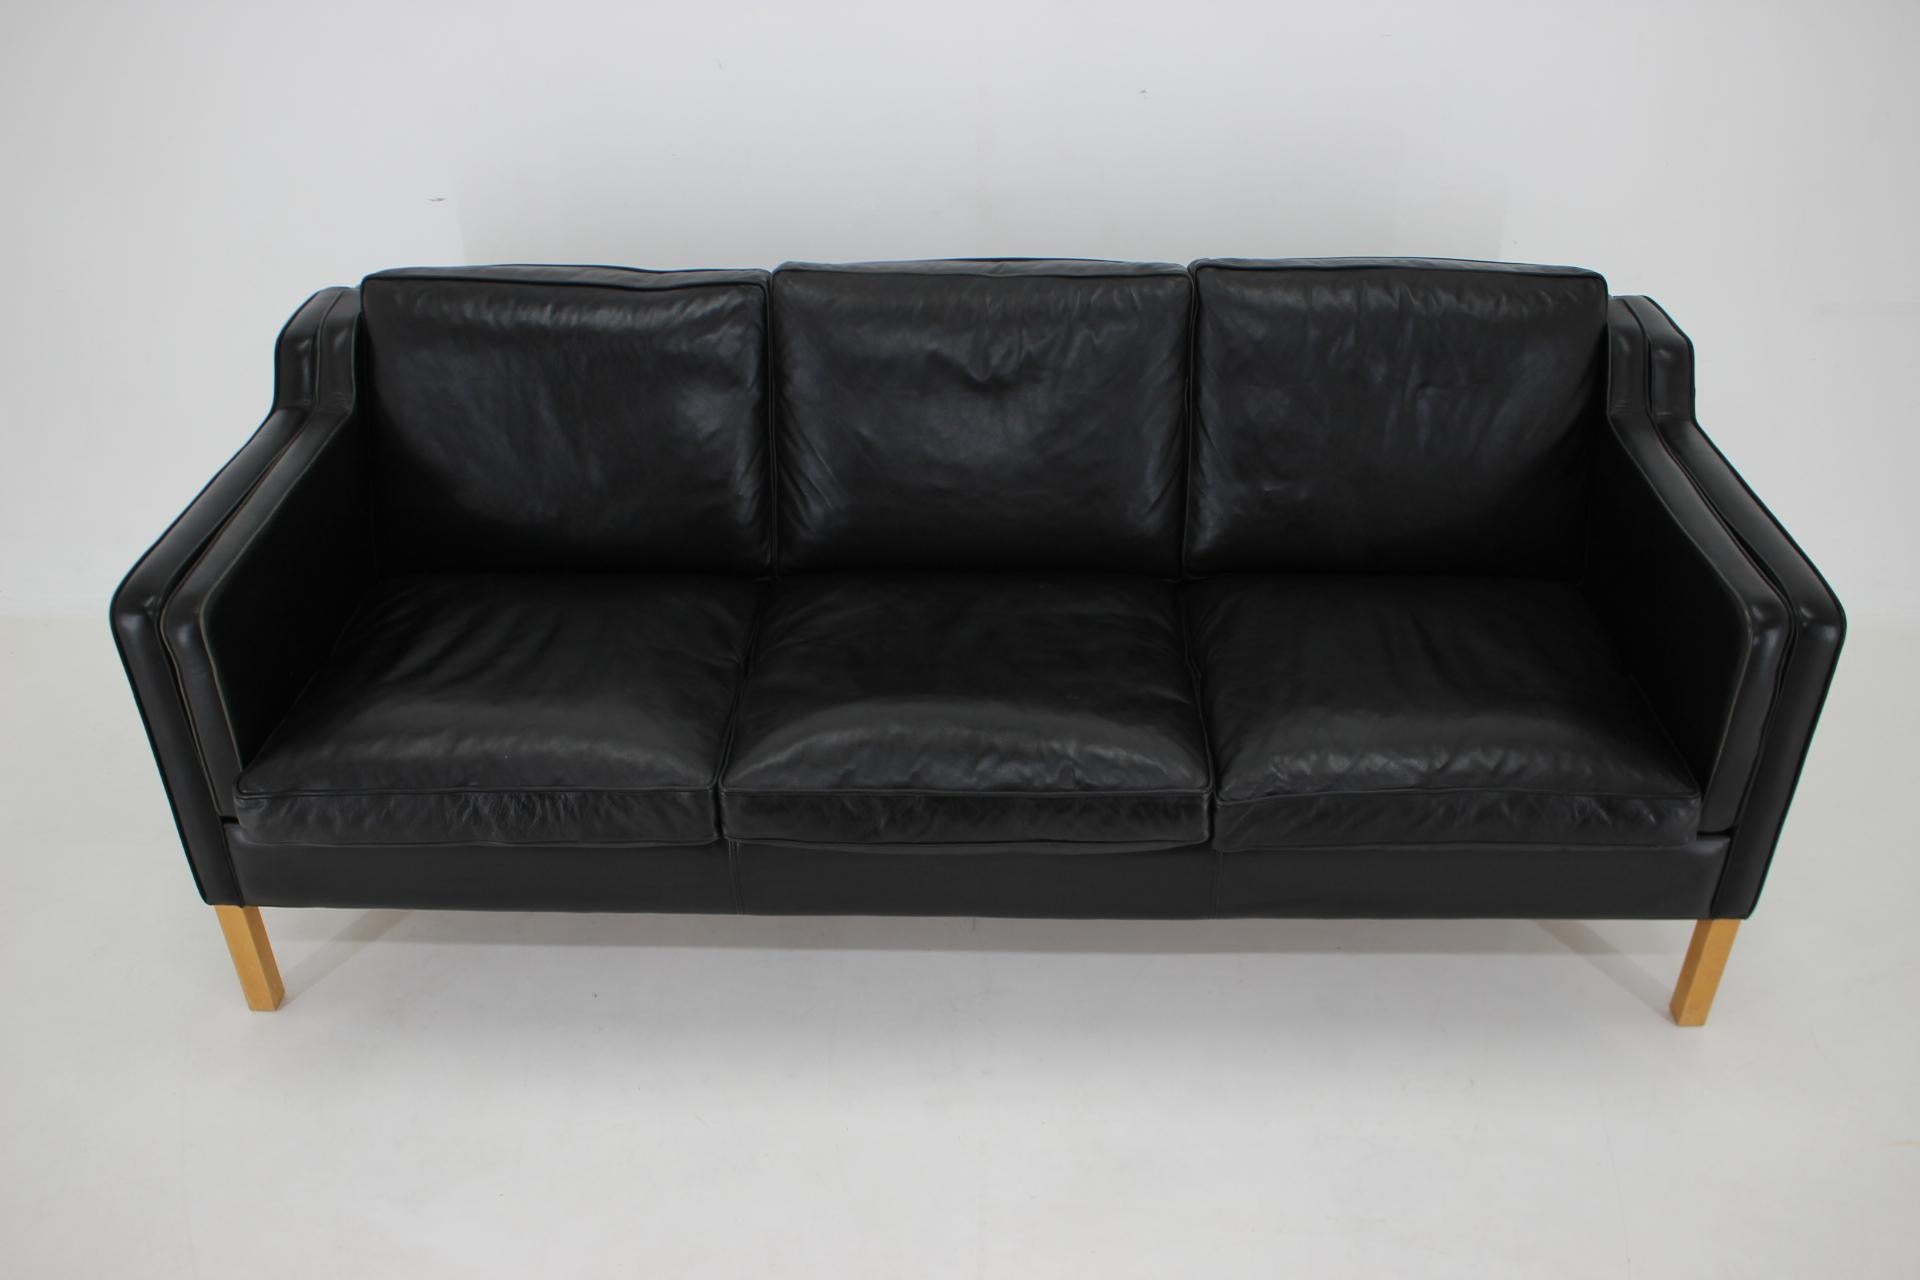 1980s Black Leather 3-Seater Sofa by Stouby, Denmark  1